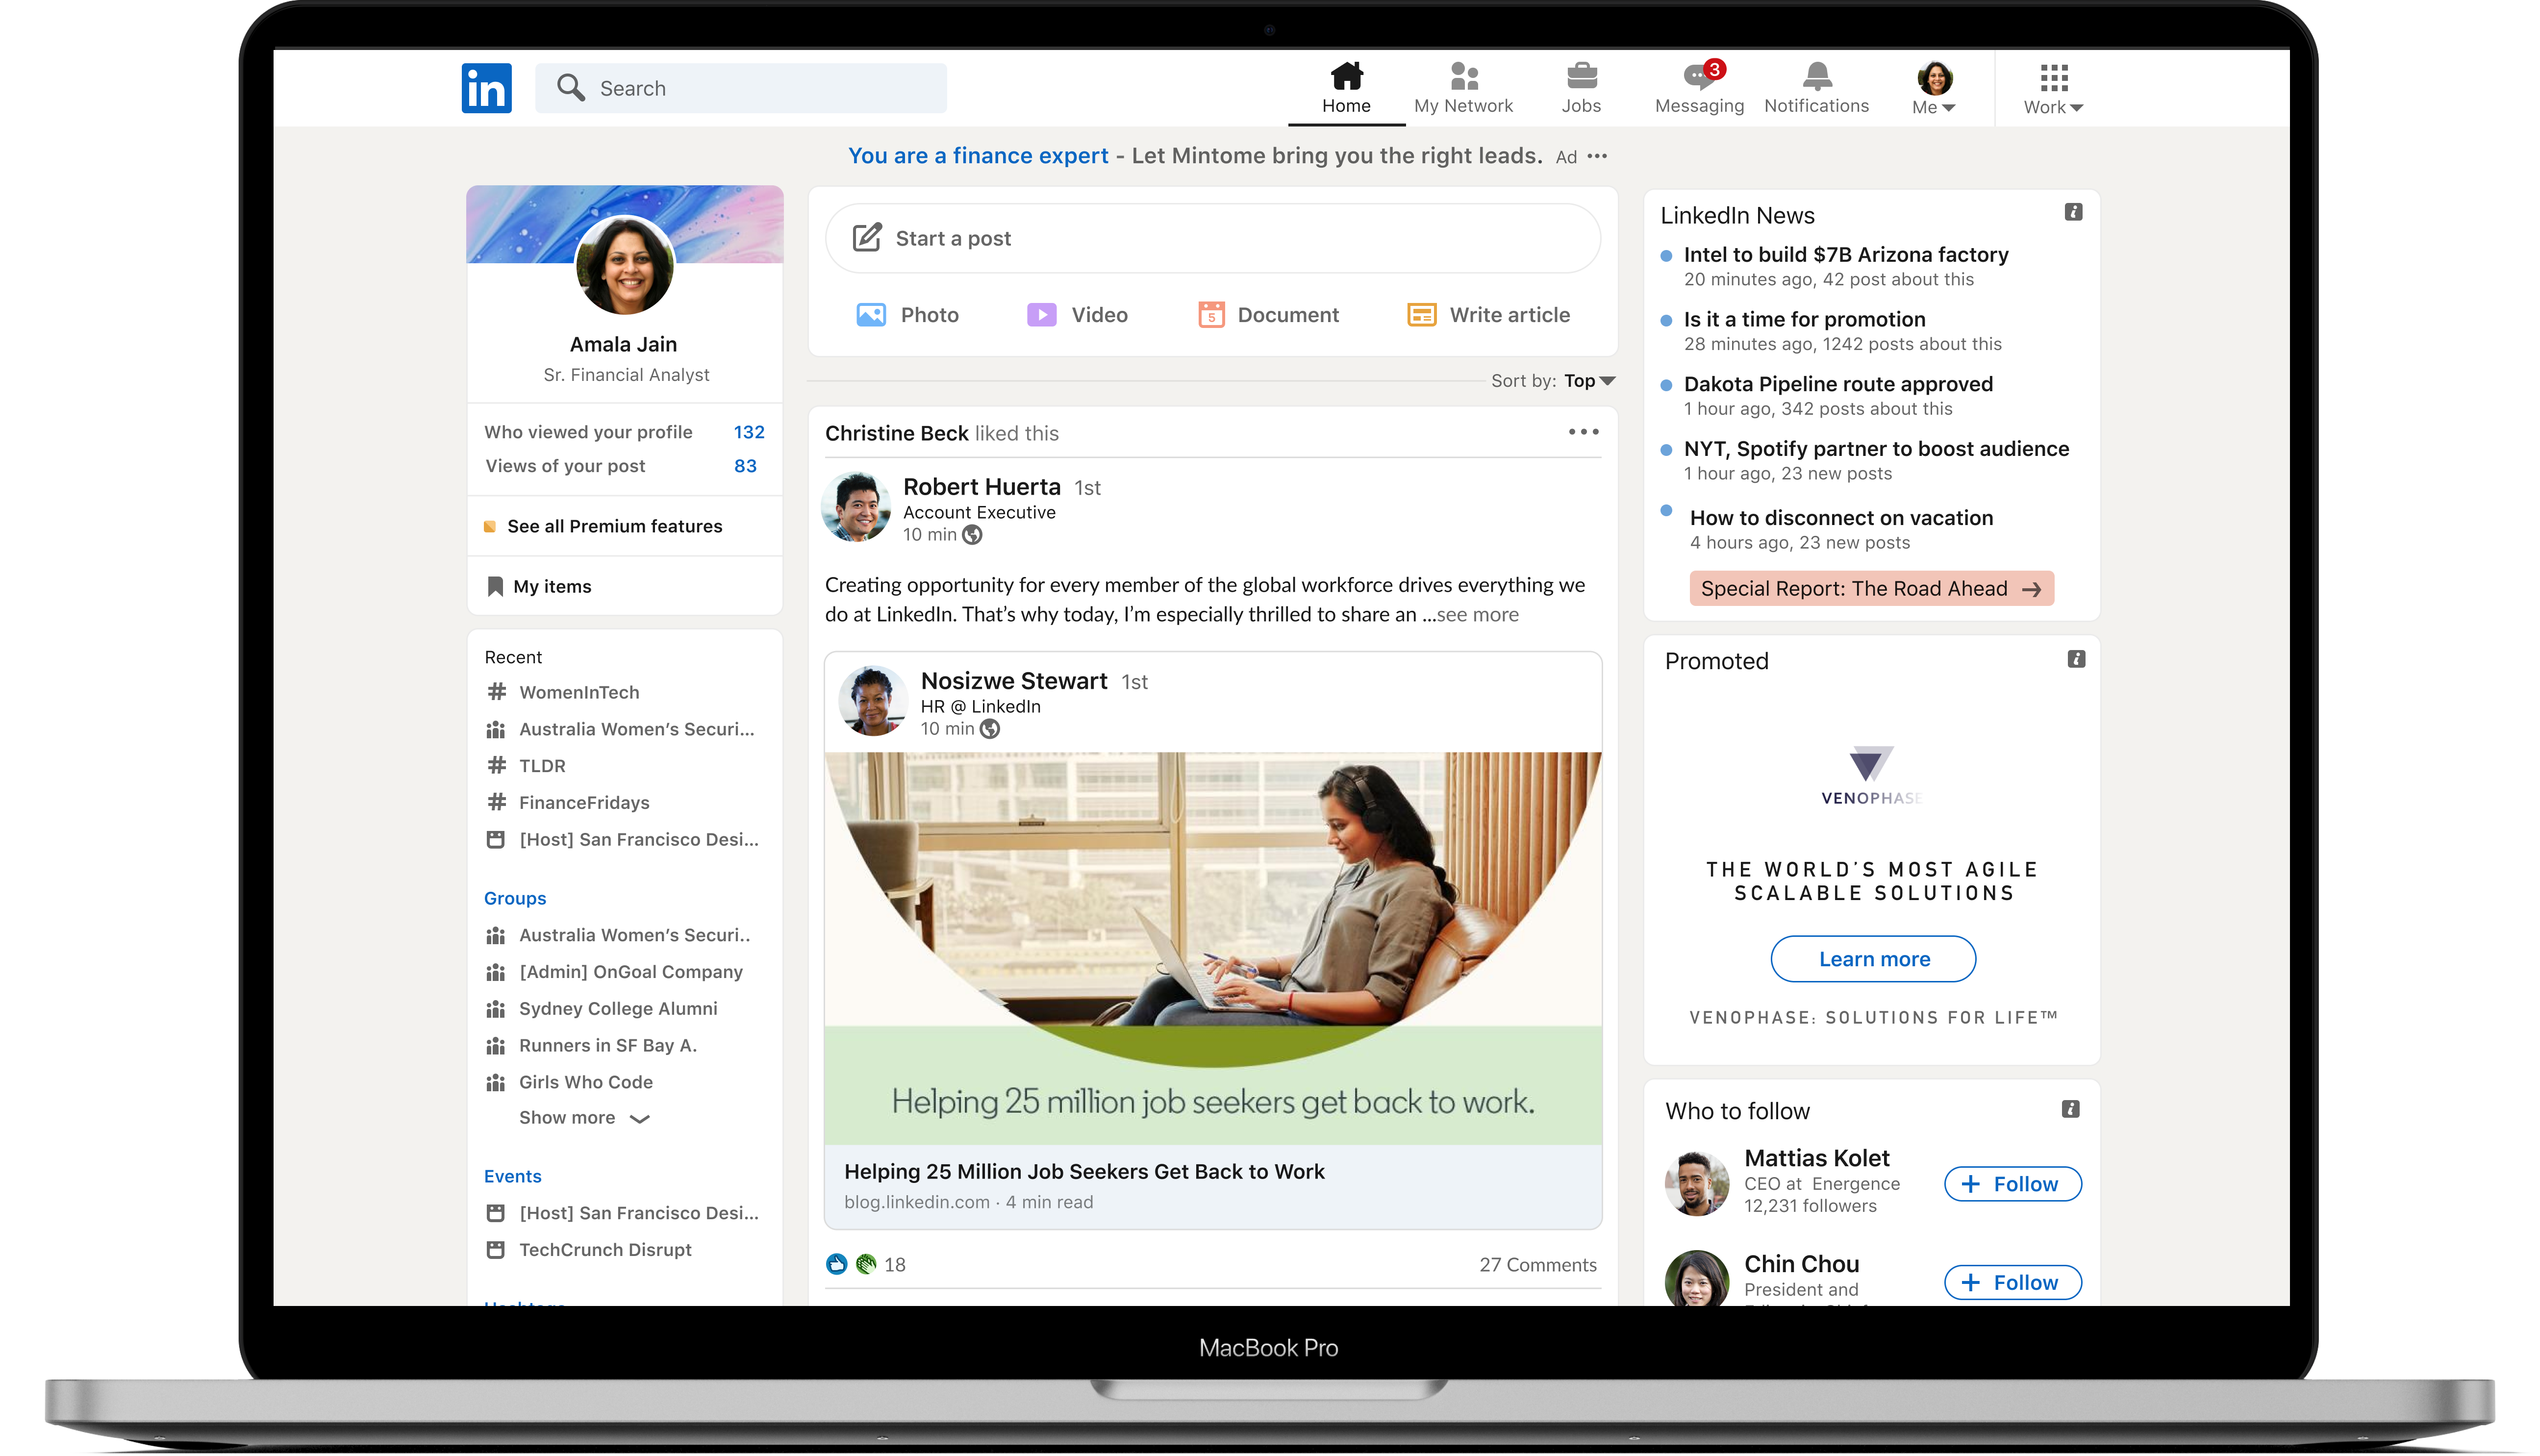 A New Look for LinkedIn (from the Inside Out)